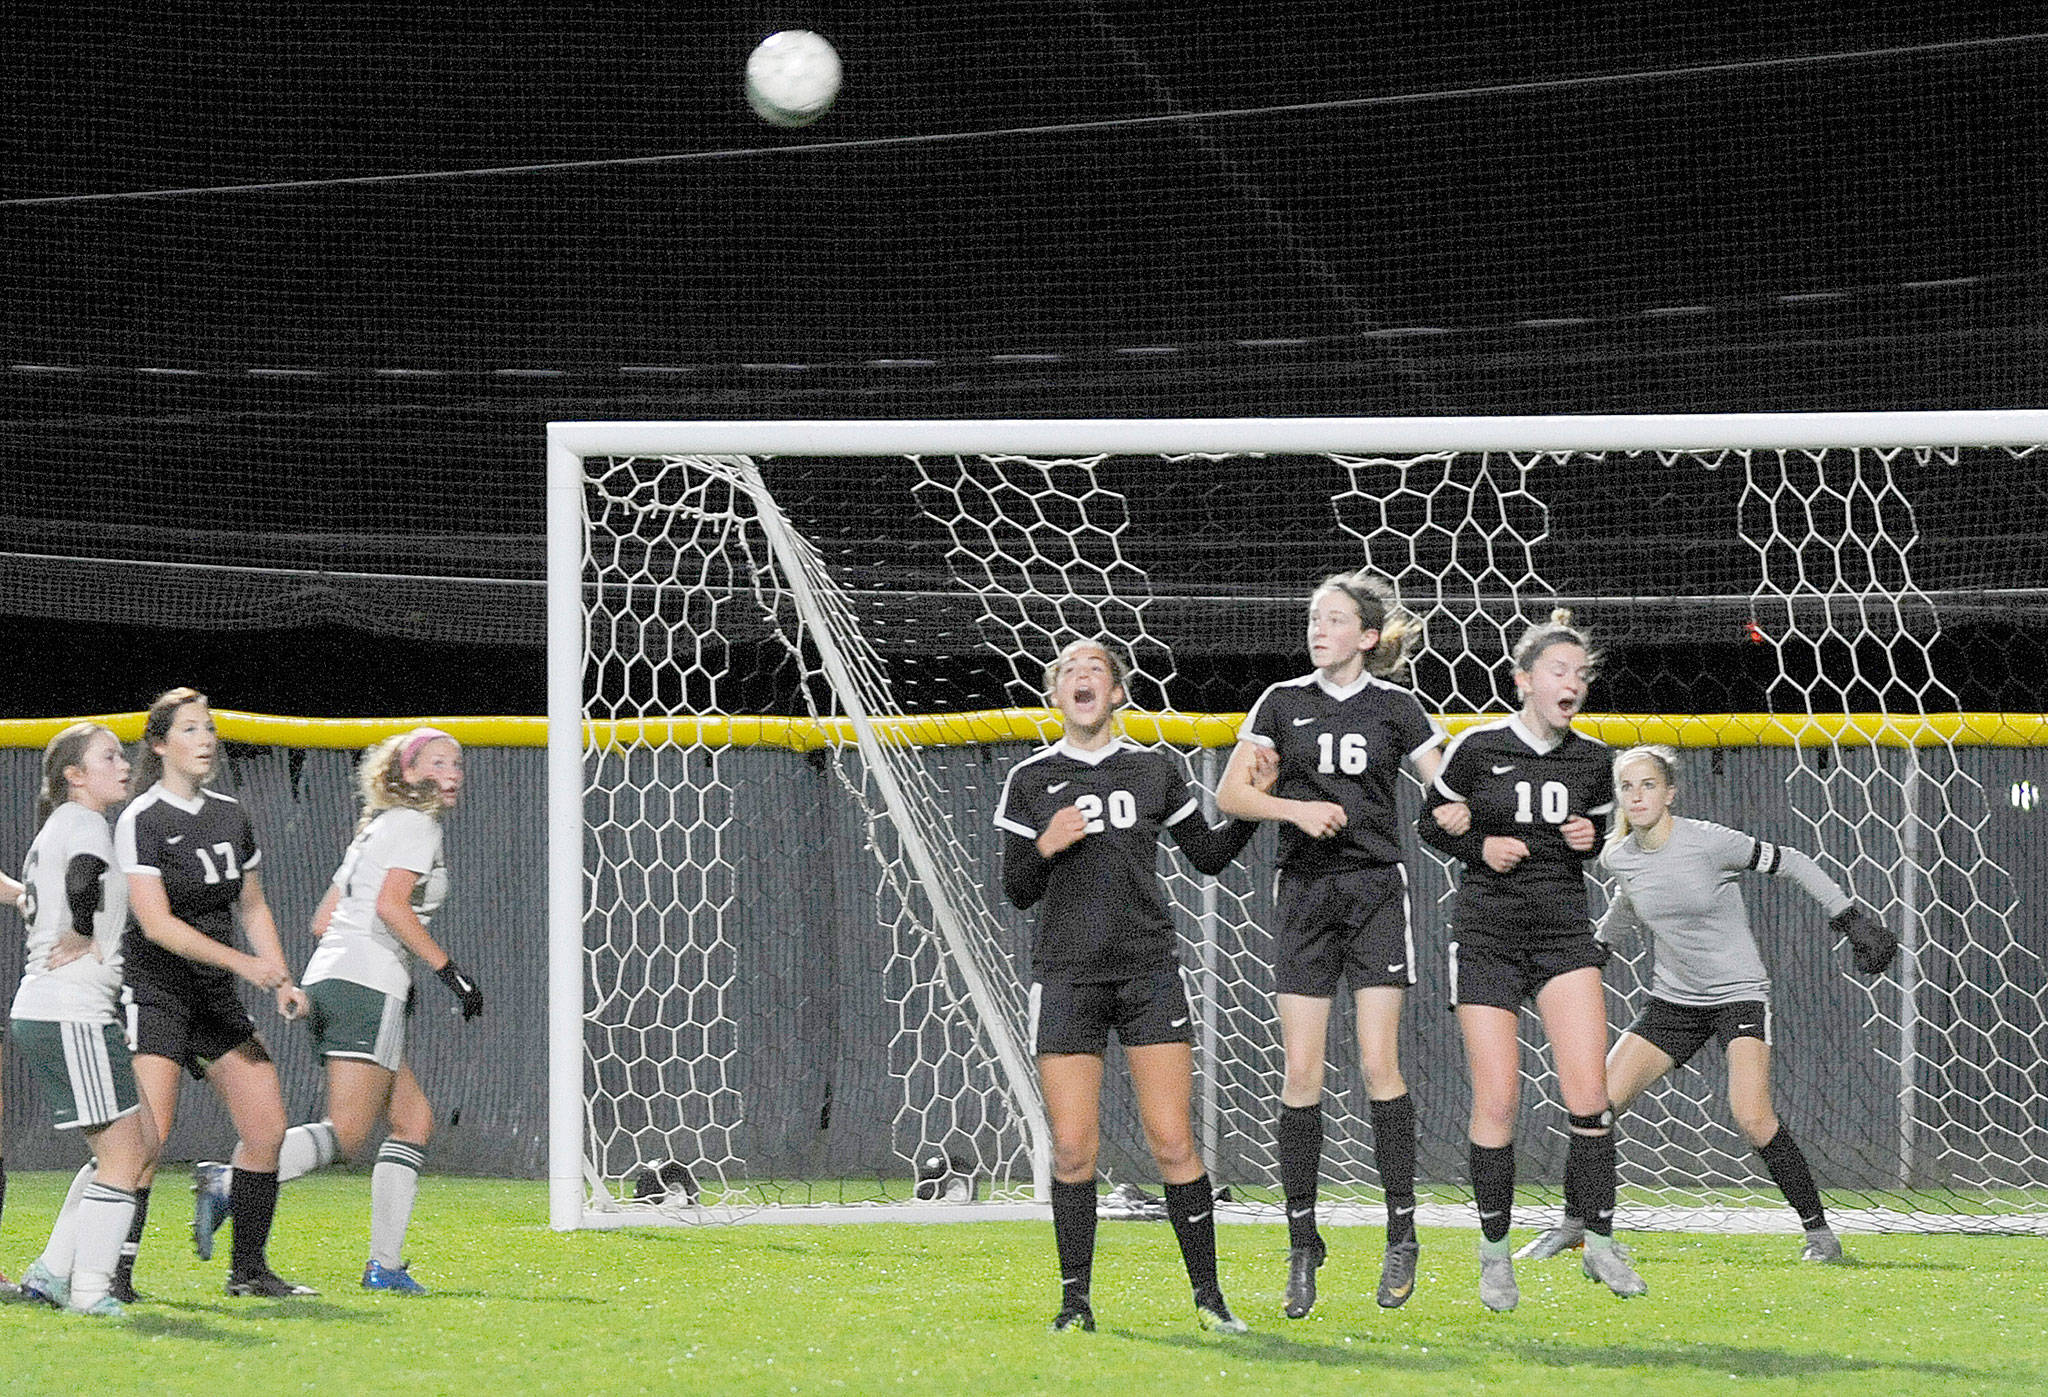 Girls soccer: SHS’s playoff hopes take hit with losses